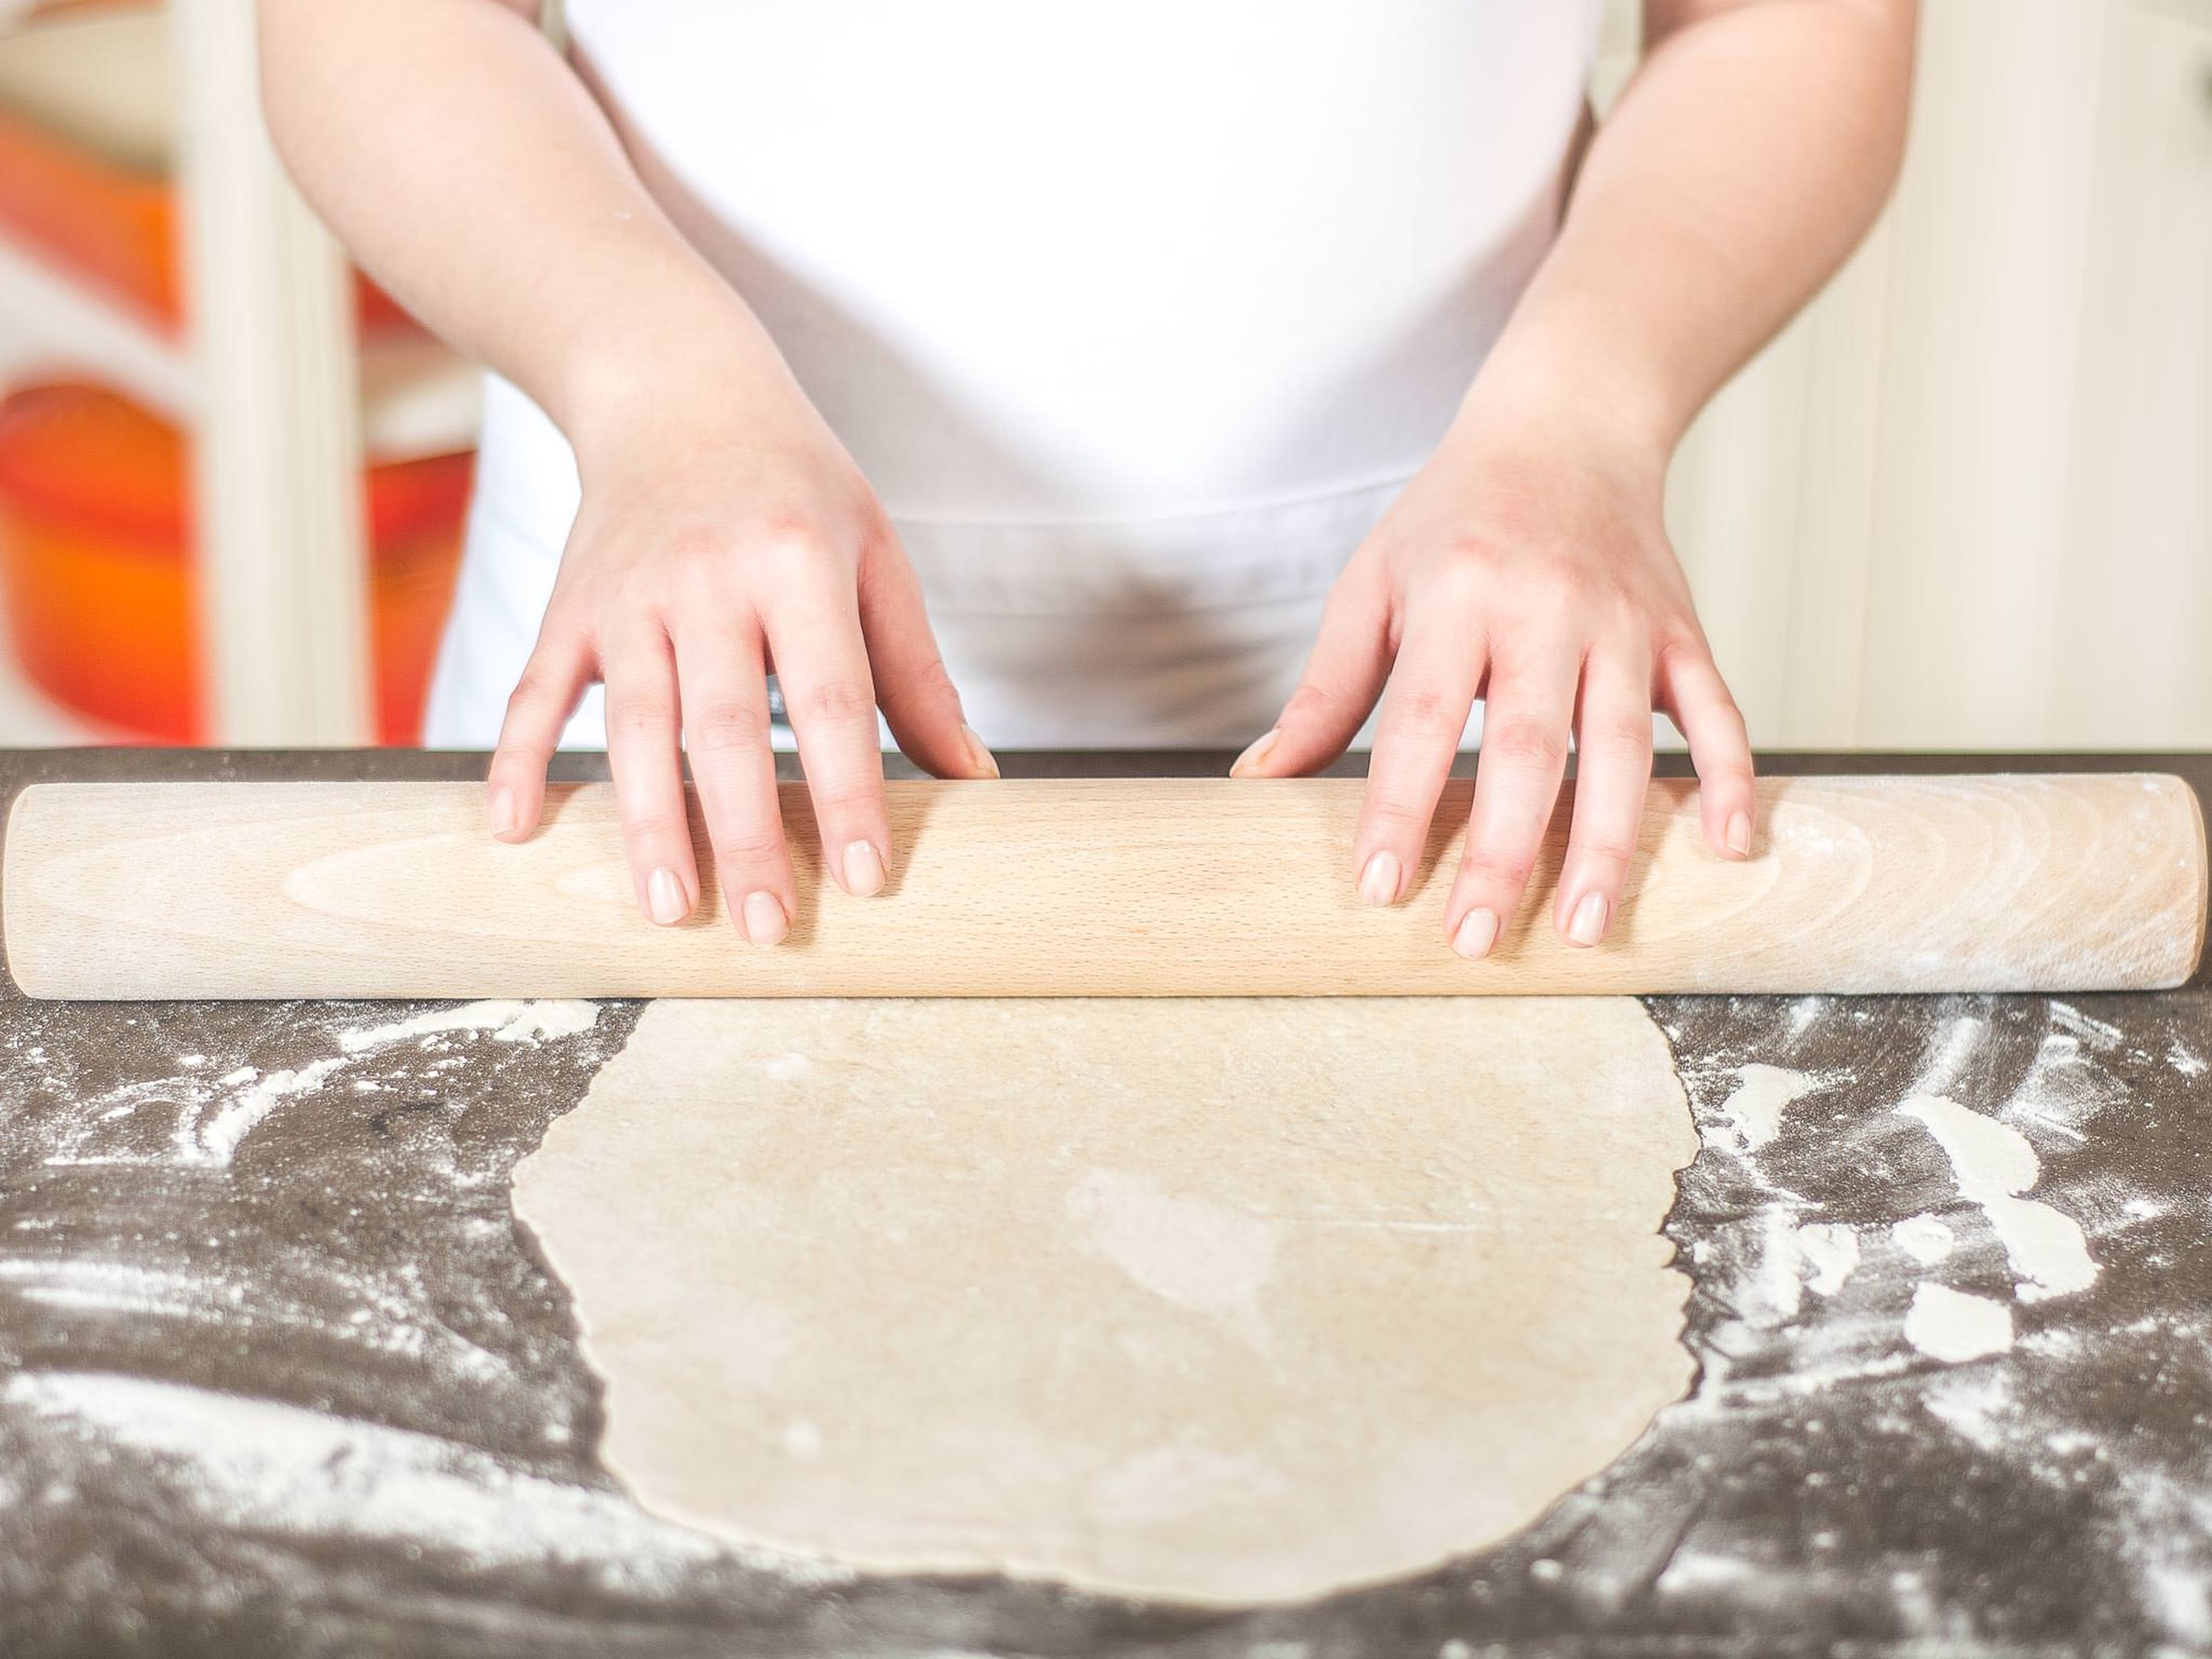 Separate dough into two halves and roll each one out as thinly as possible on a work surface sprinkled with flour.